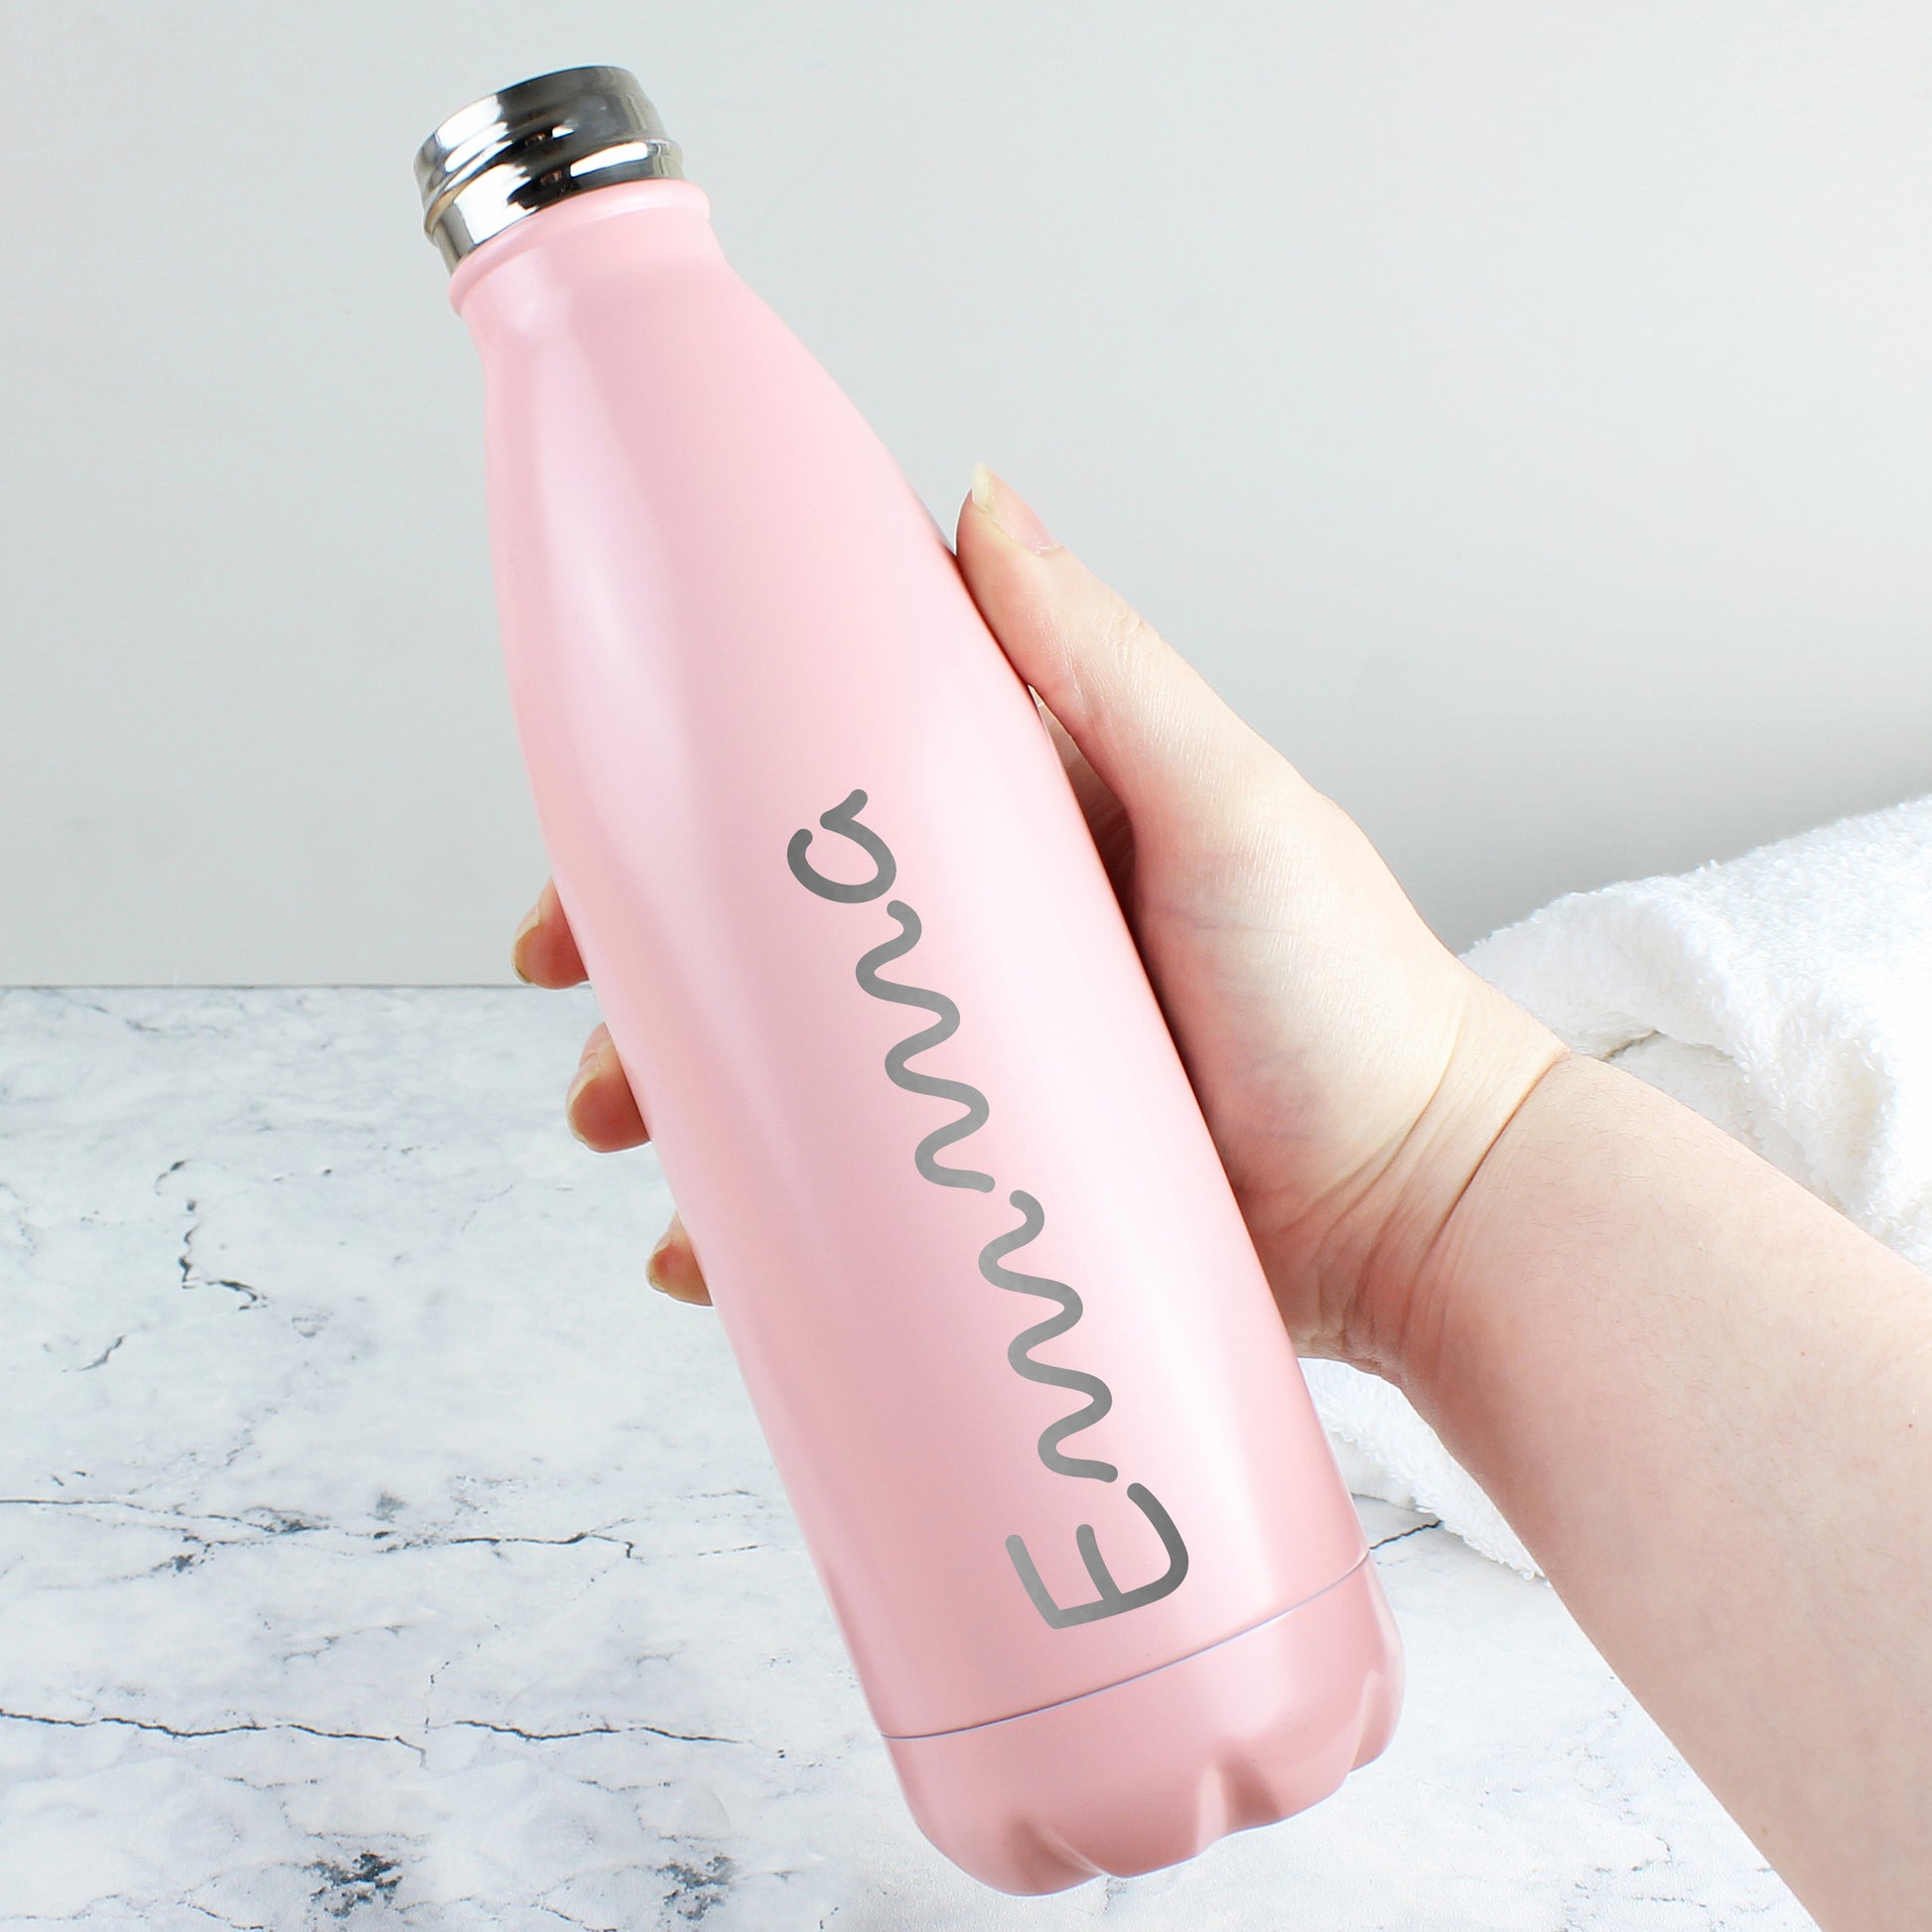 Island themed pink insulated drinks bottle - Lilybet loves